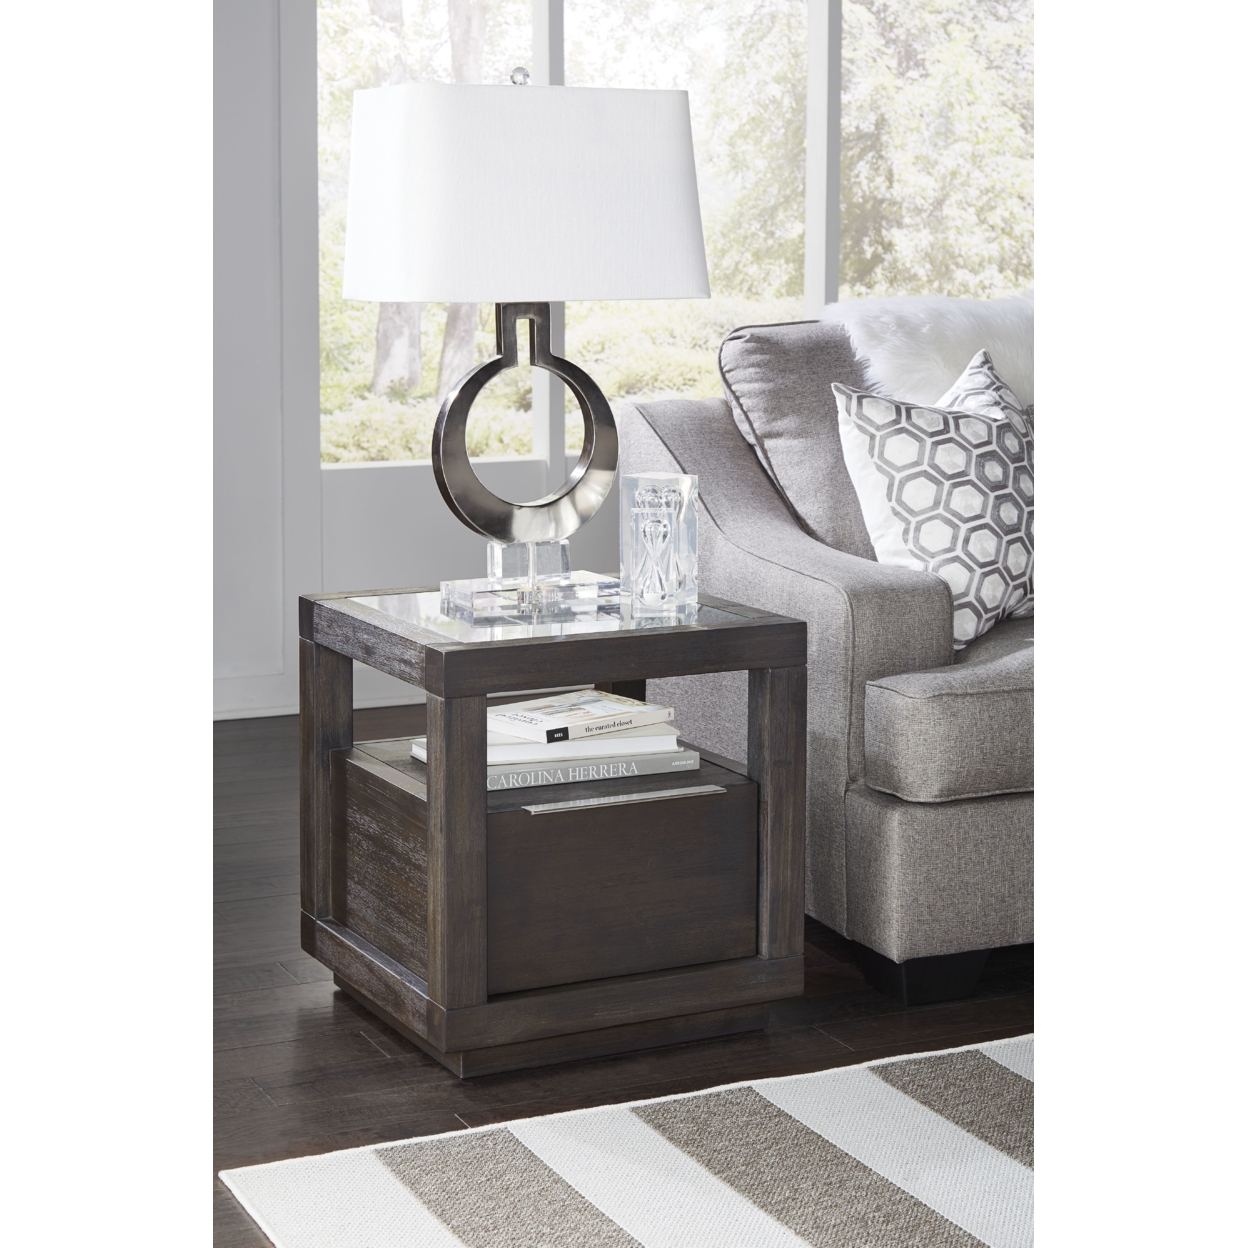 Acacia Wood End Table With Glass Insert Tabletop, Gray- Saltoro Sherpi